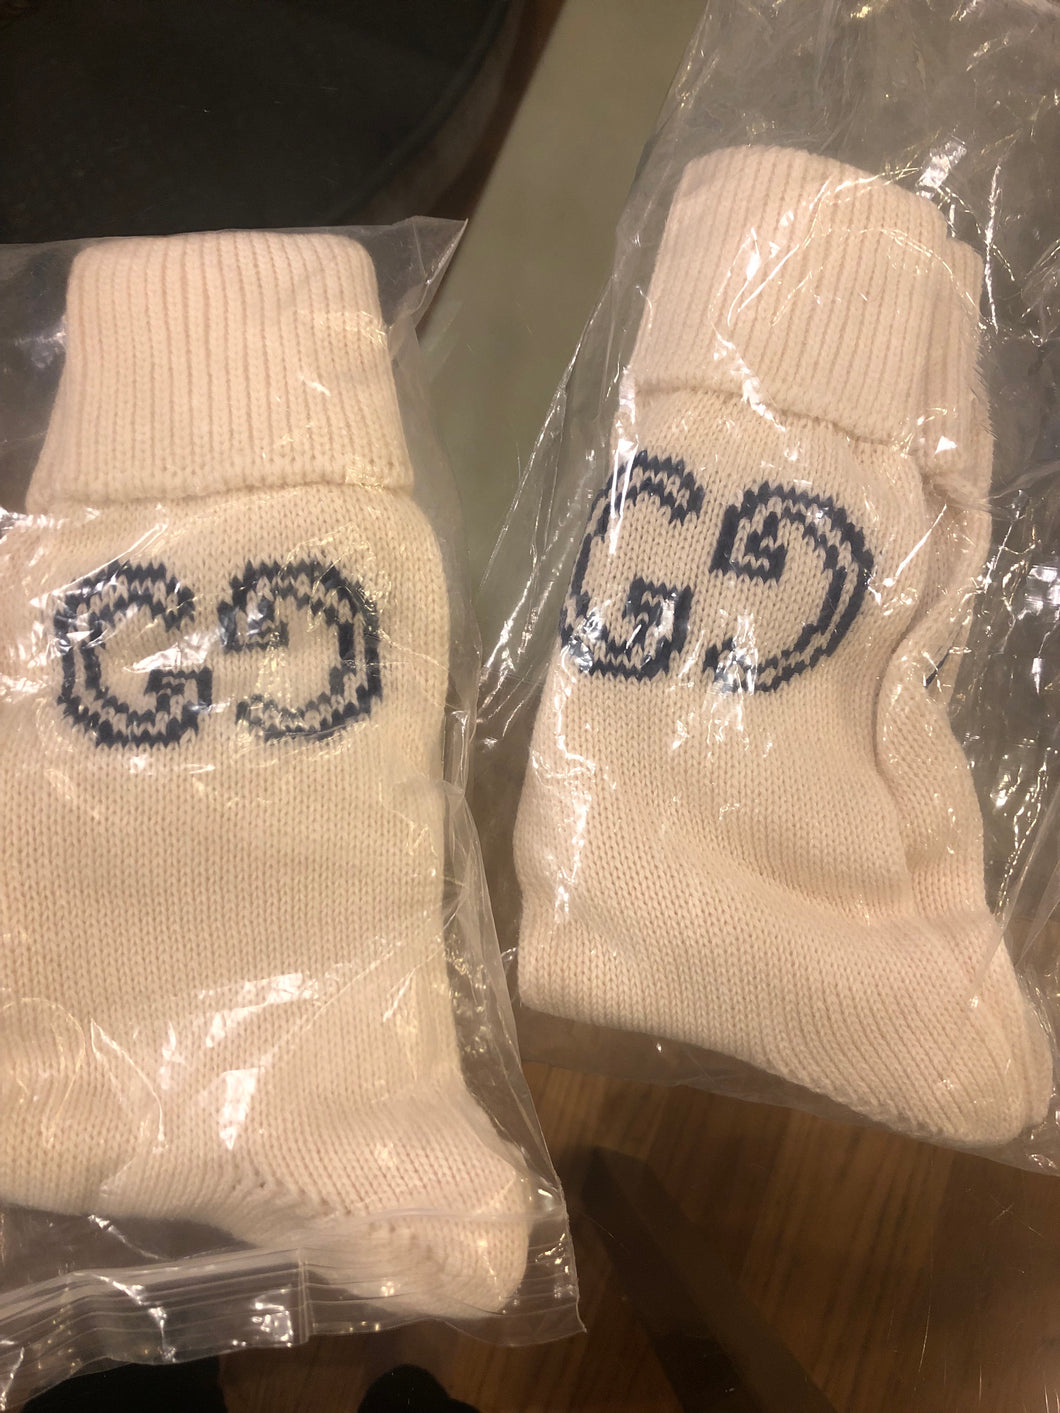 Gucci GG Logo Lit Circus Knit Socks in Ivory